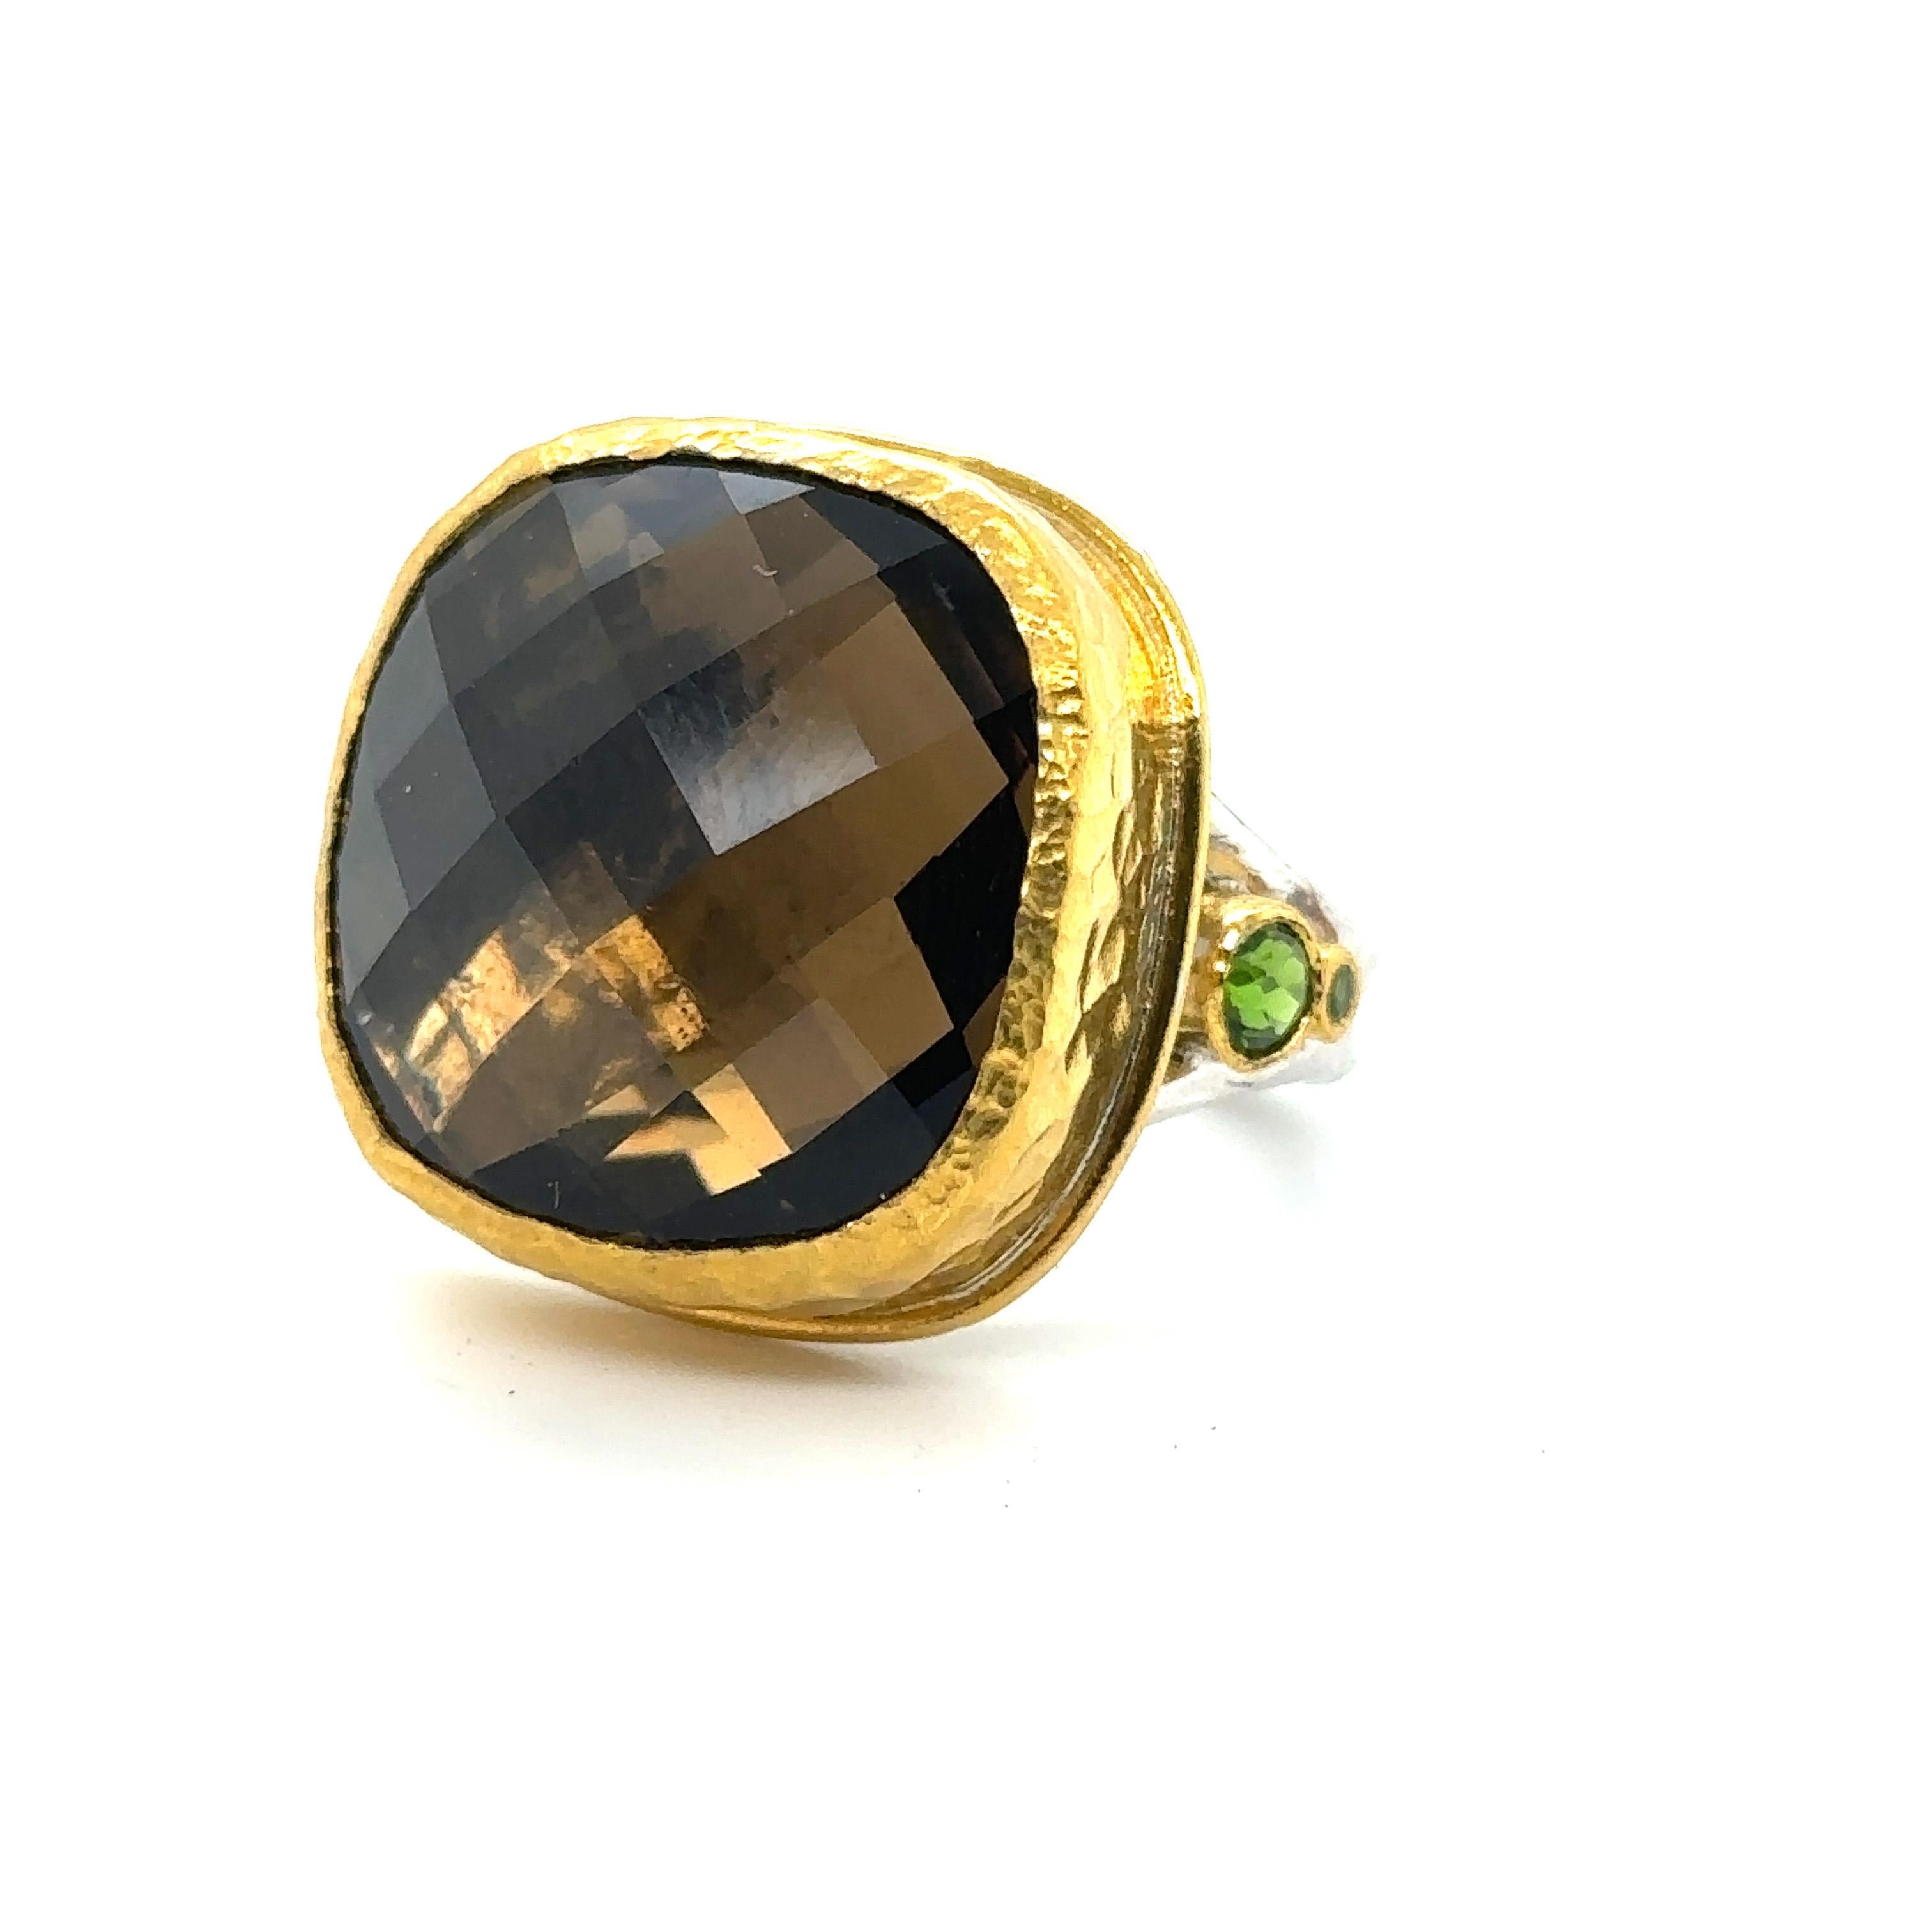 JAS-19-1993-24KT GOLD/SS with CUSHION CUT SMOKY QUARTZ & CHROME DIOPSIDES In New Condition For Sale In New York, NY